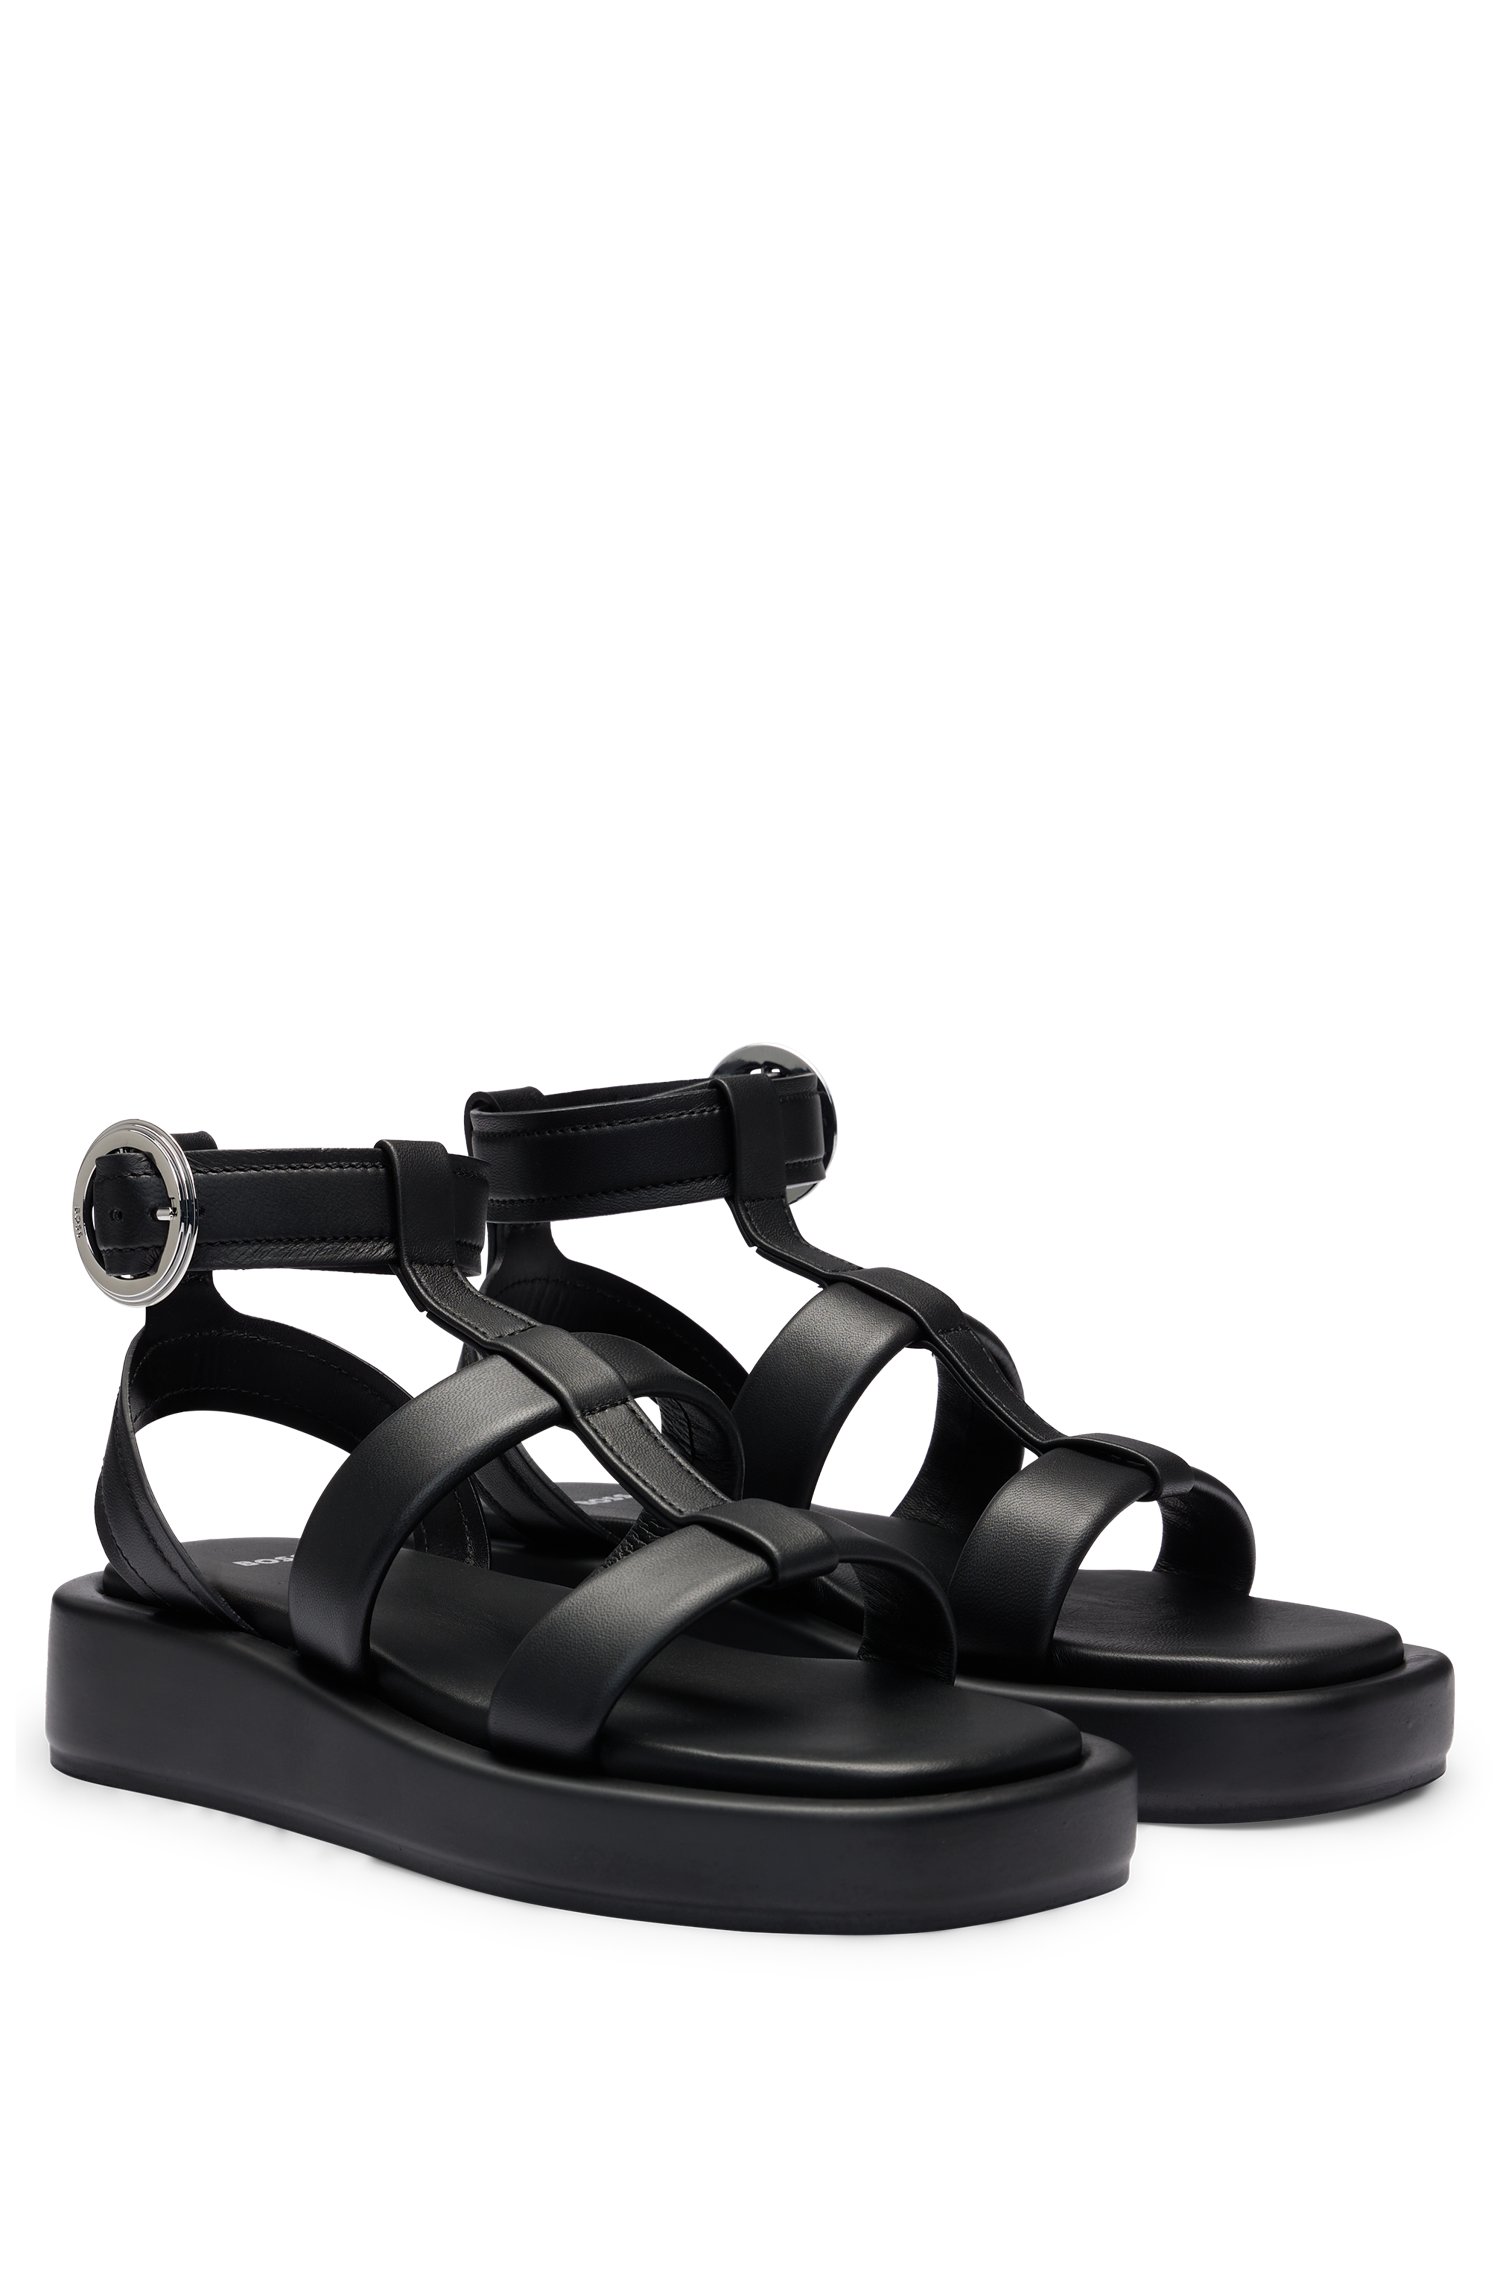 Platform leather sandals with branded buckle closure